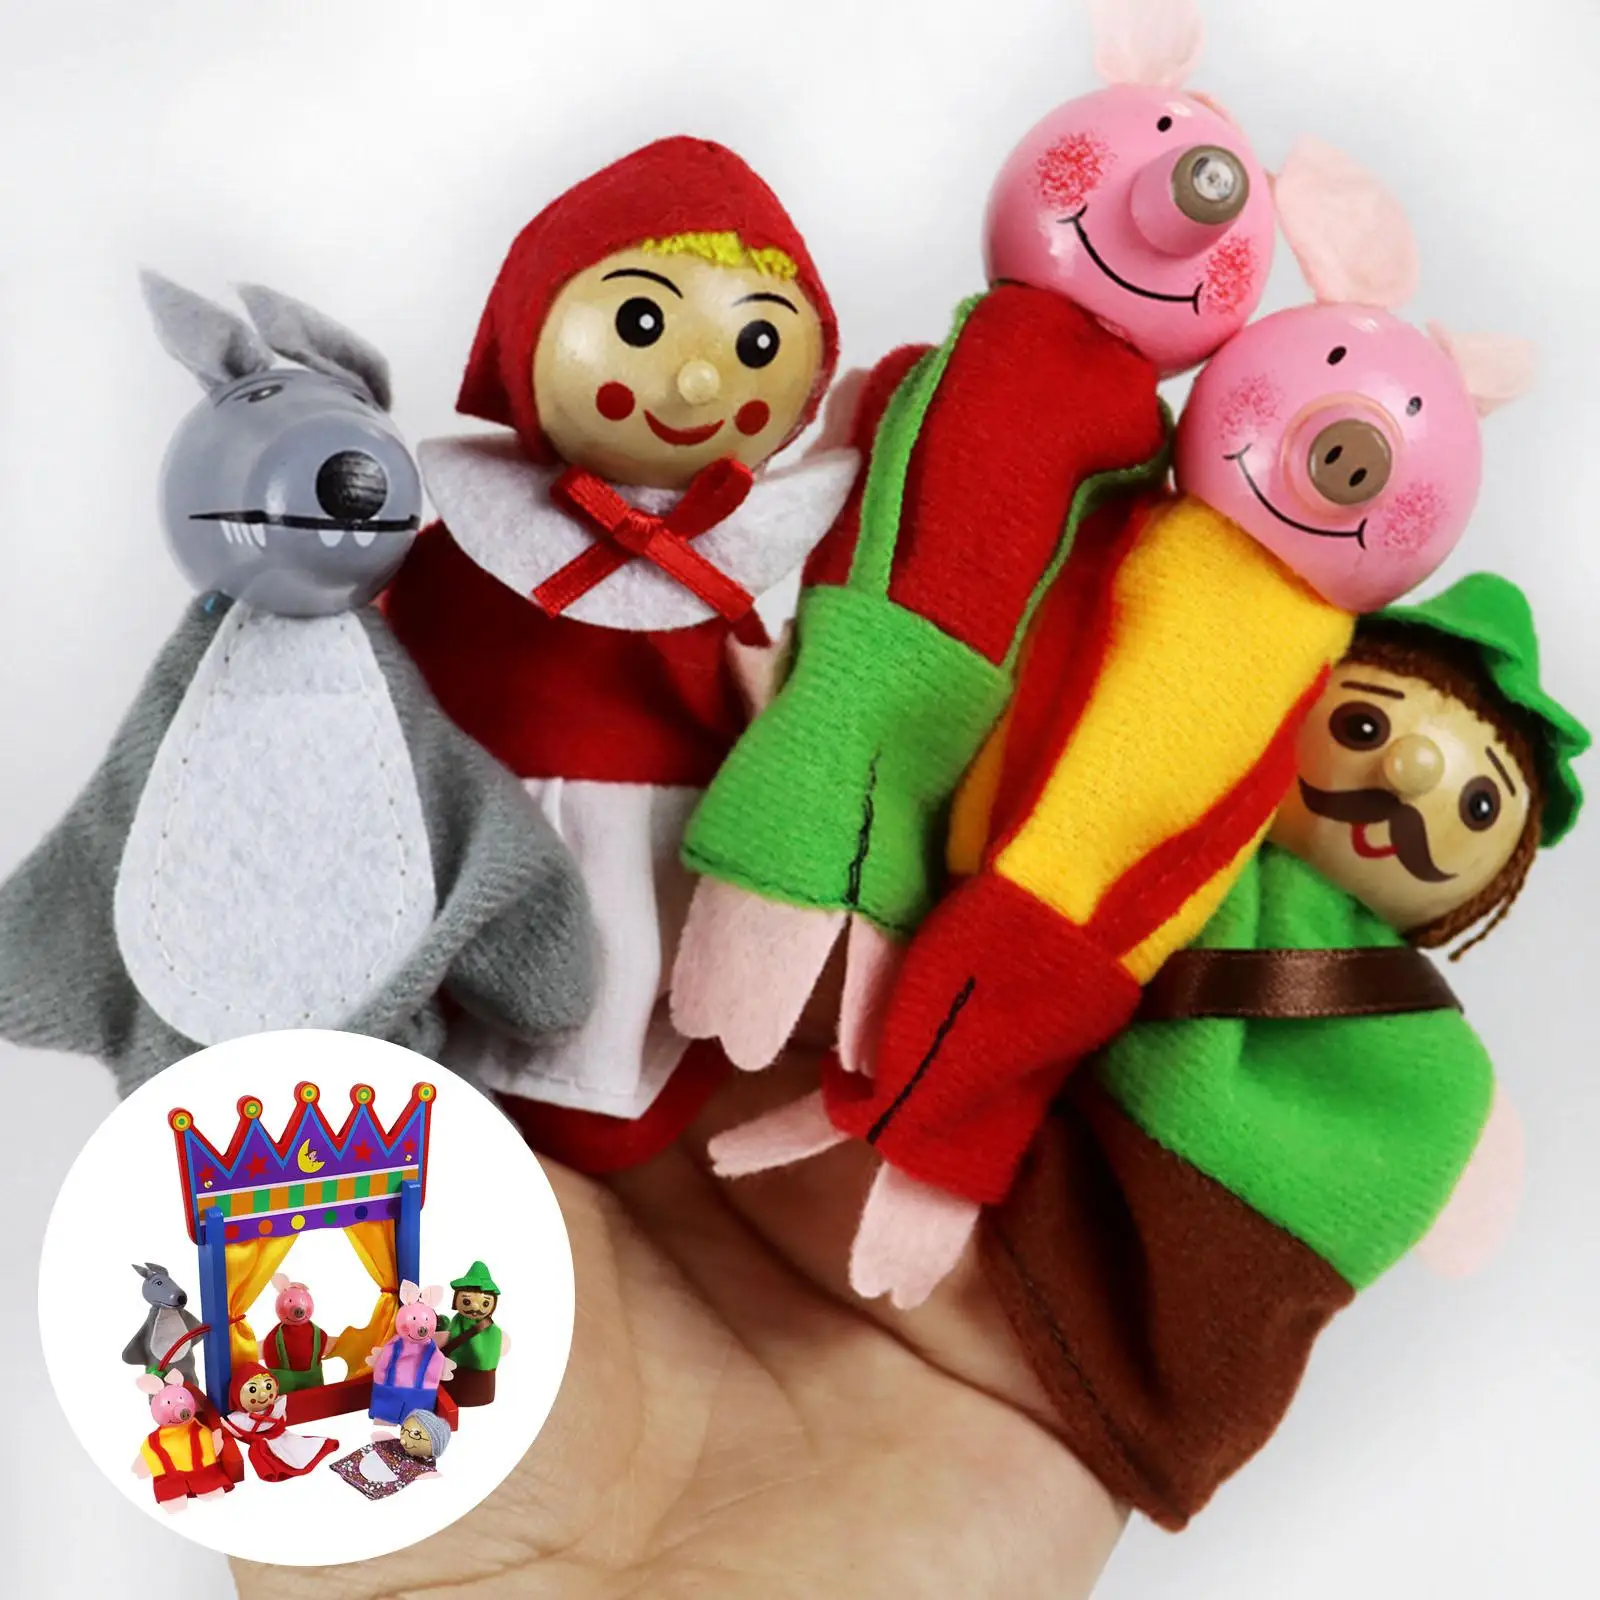 Finger Puppets Educational Toys Decorations for Activities Role Play Games